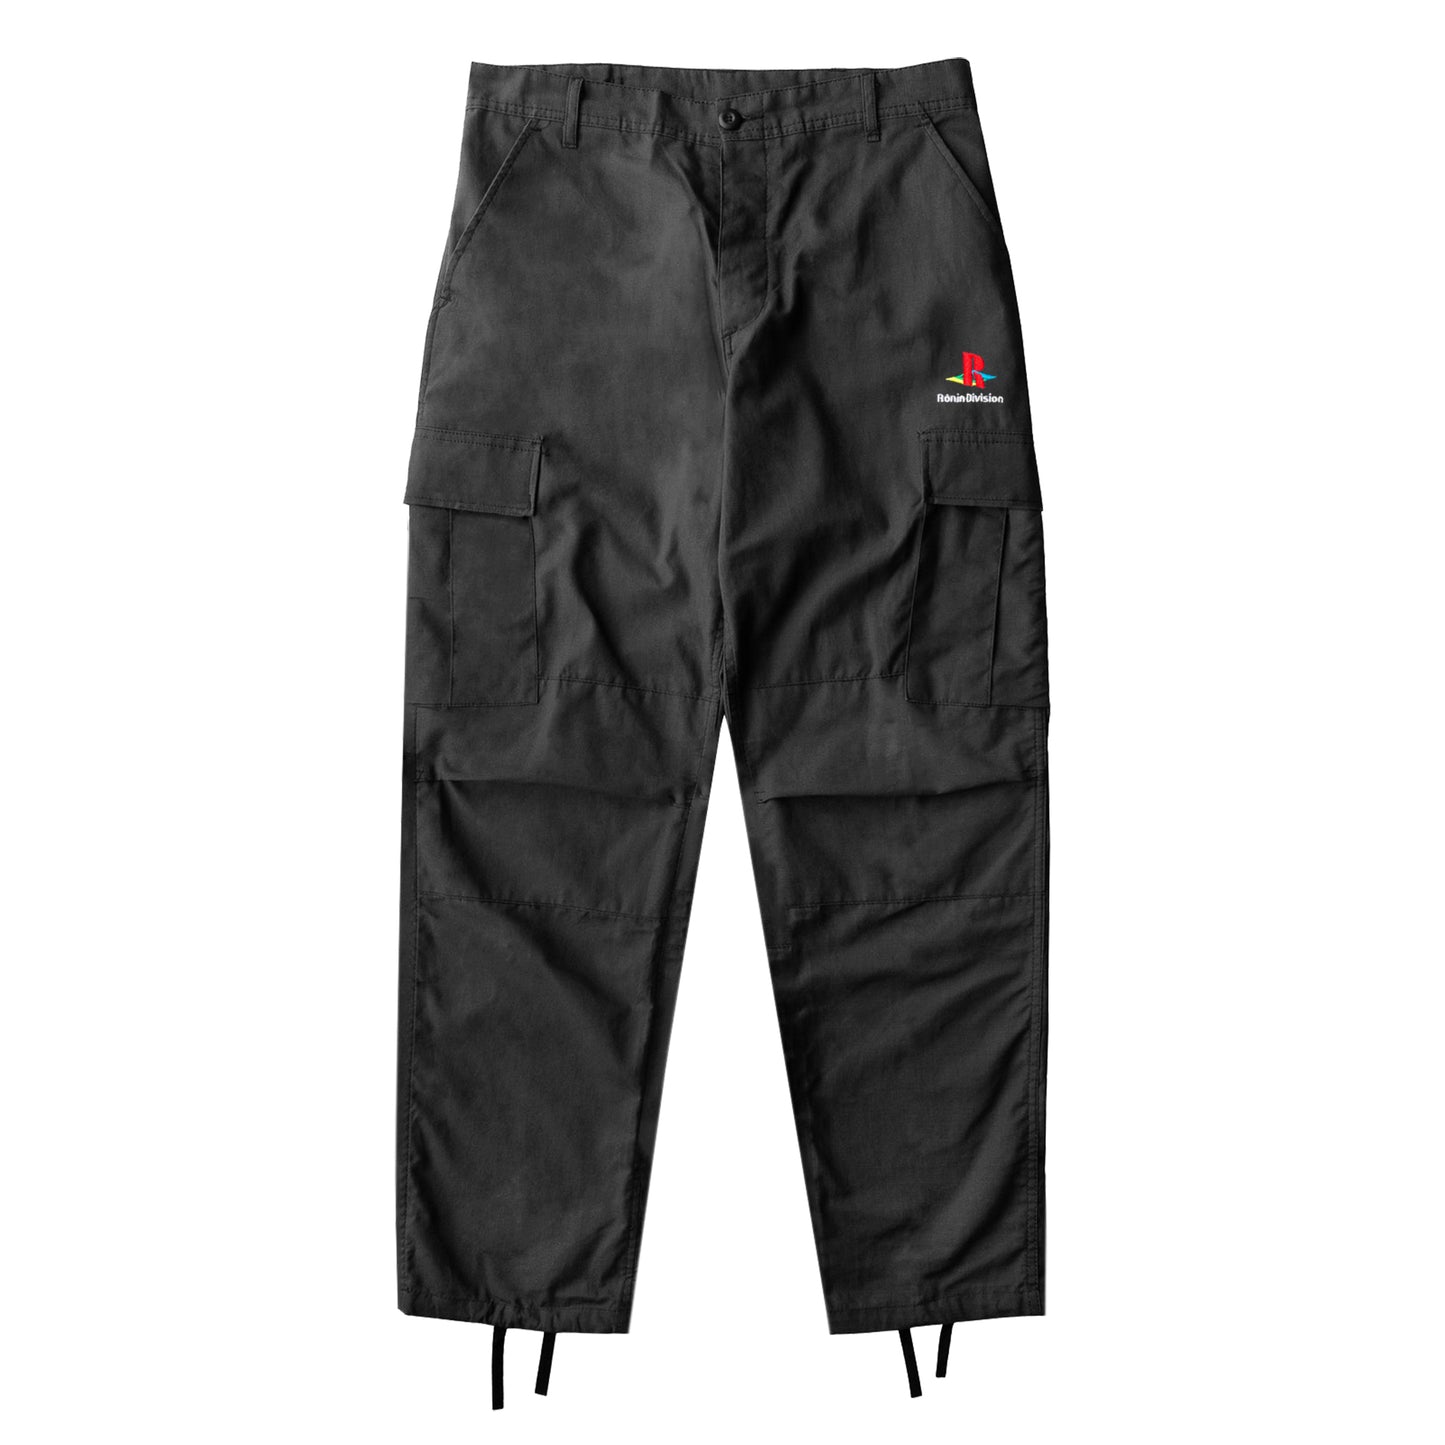 Load image into Gallery viewer, Play BDU Ripstop Cargo Pant - Black
